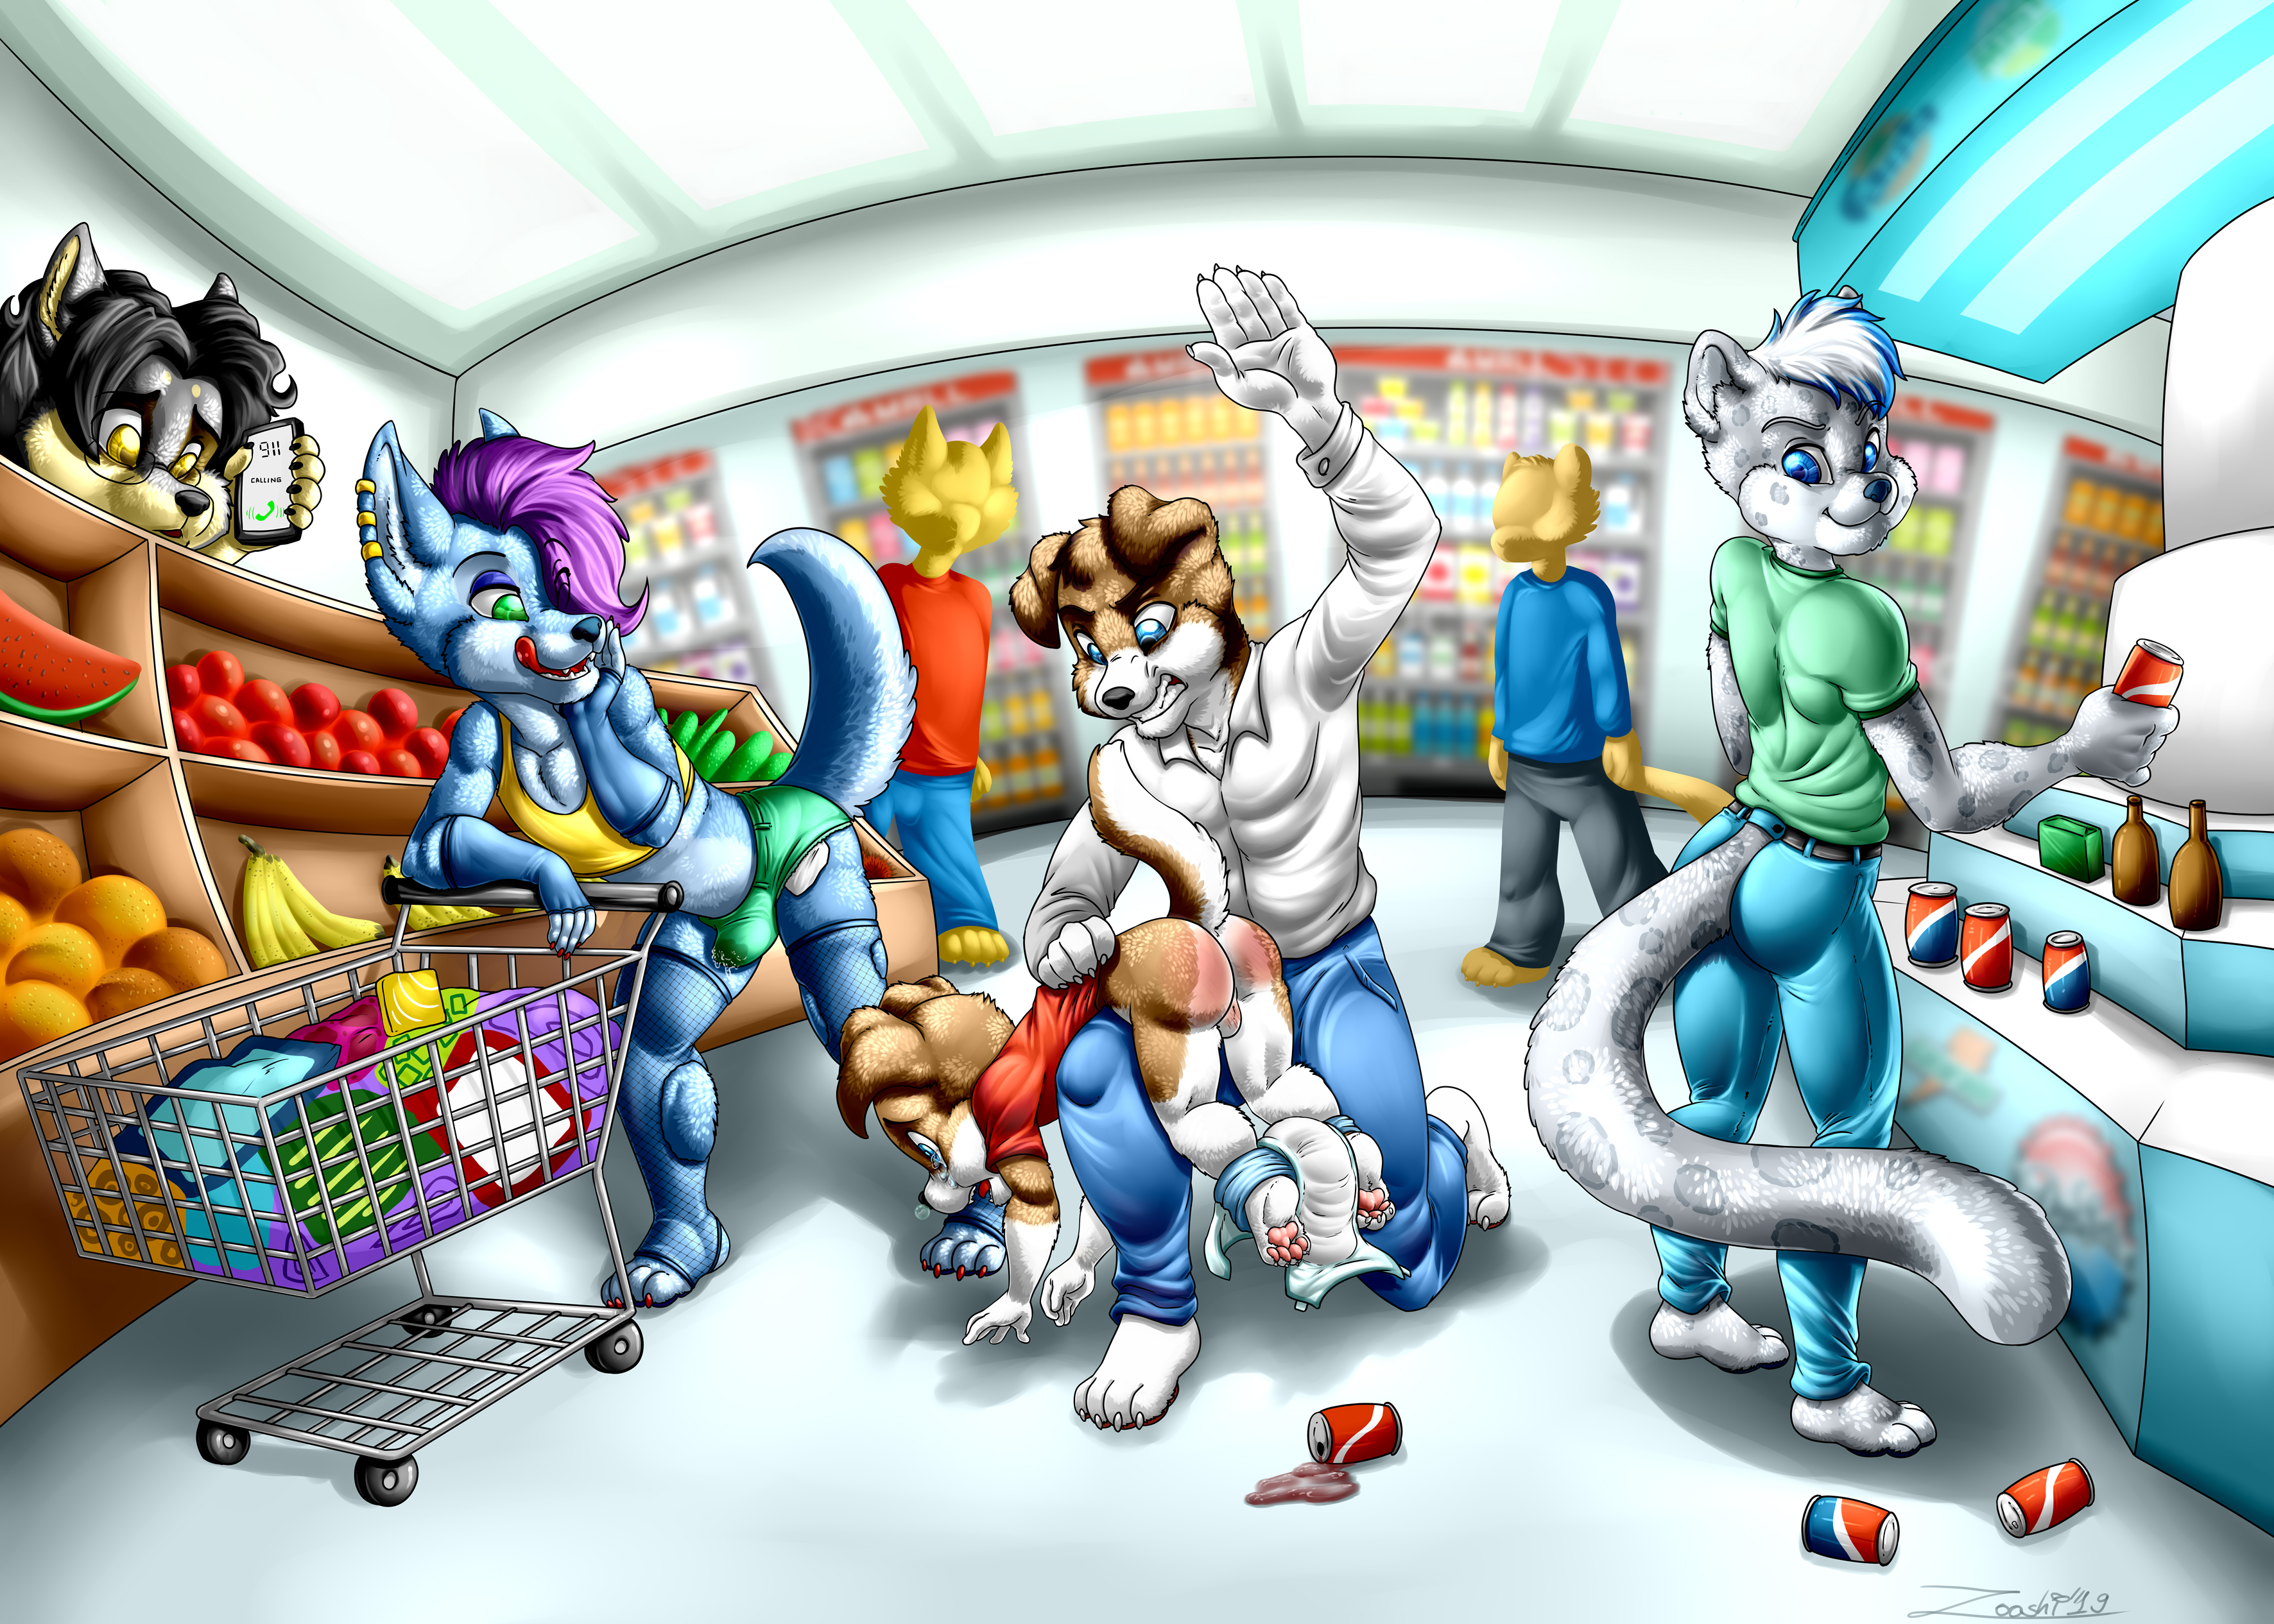 2727579_zooshi_grocery_store_final-ink